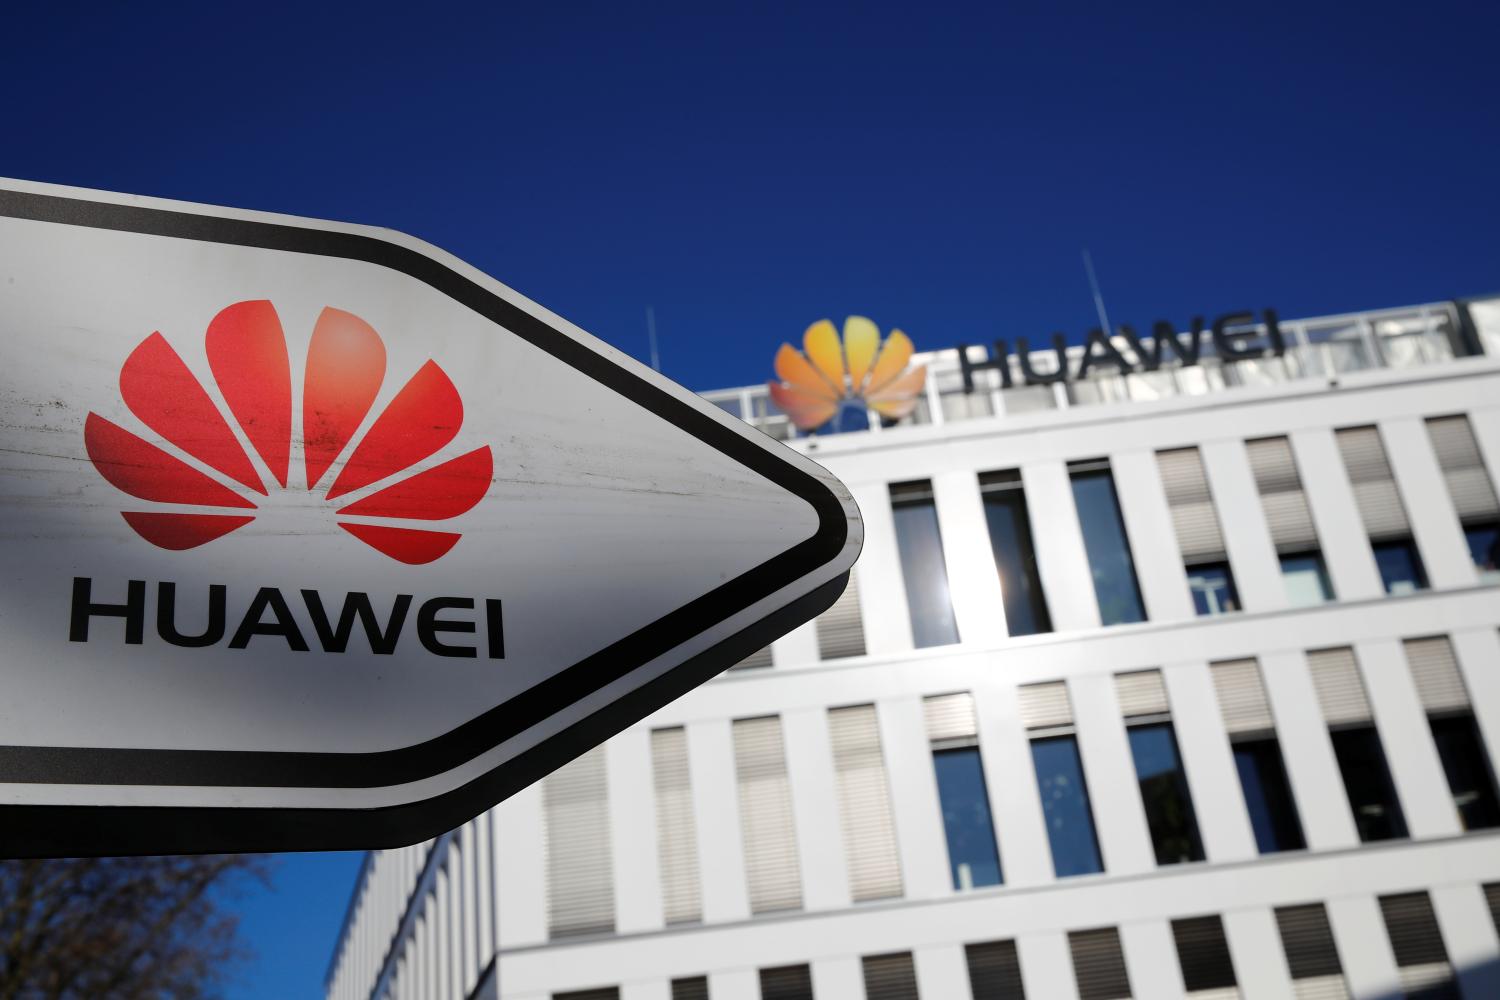 The logo of Huawei Technologies is pictured in front of the German headquarters of the Chinese telecommunications giant in Duesseldorf, Germany, February 18, 2019.    REUTERS/Wolfgang Rattay - RC16C5079E90